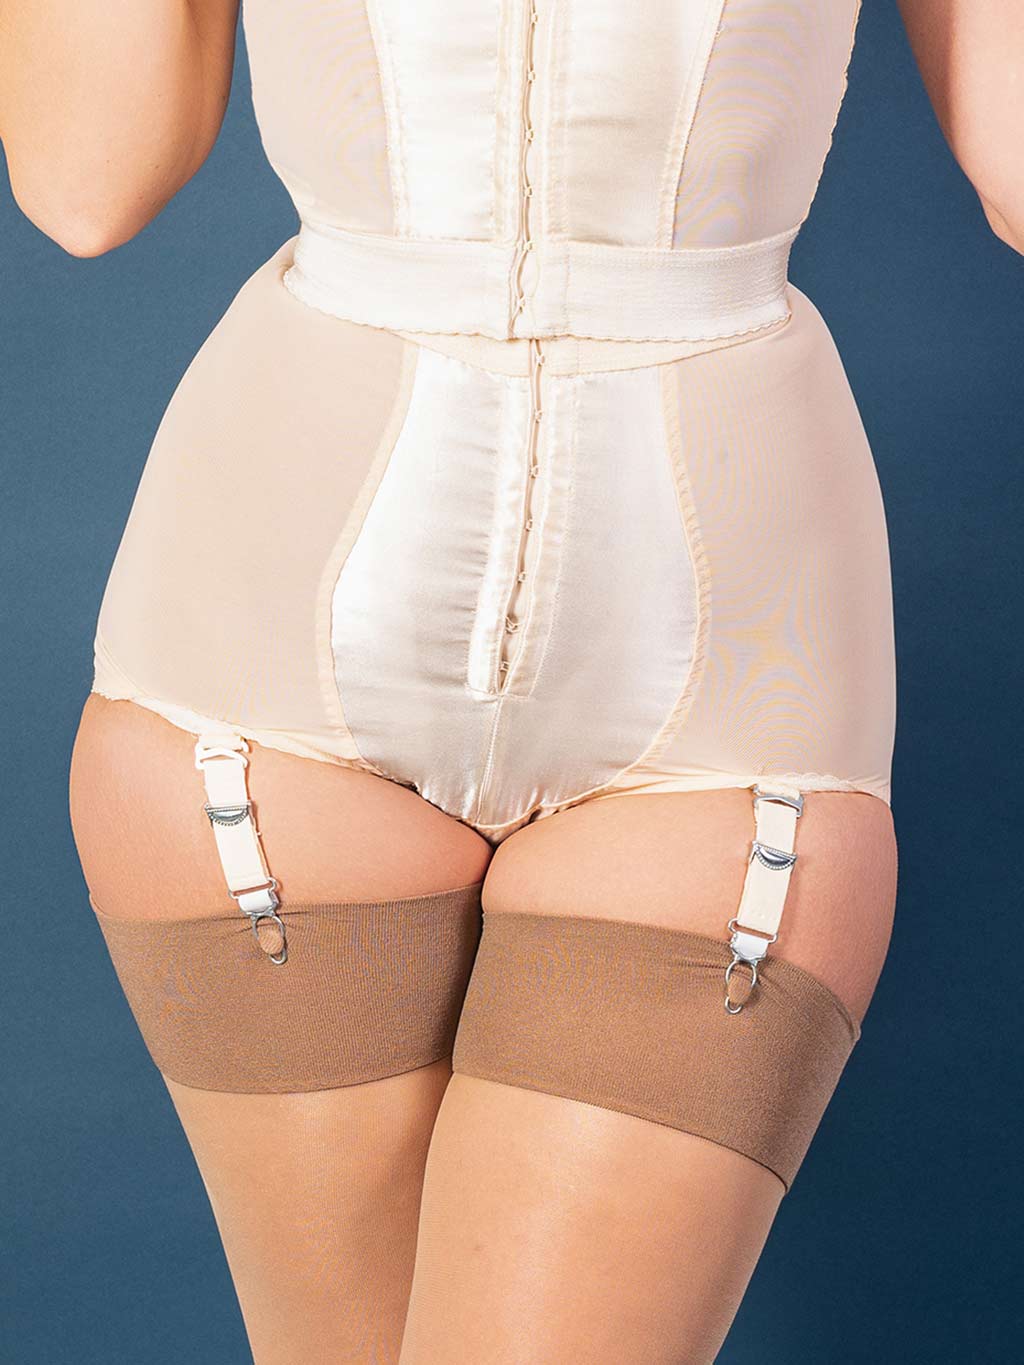 Lightweight Girdle with 6 Metal Suspenders - What Katie Did